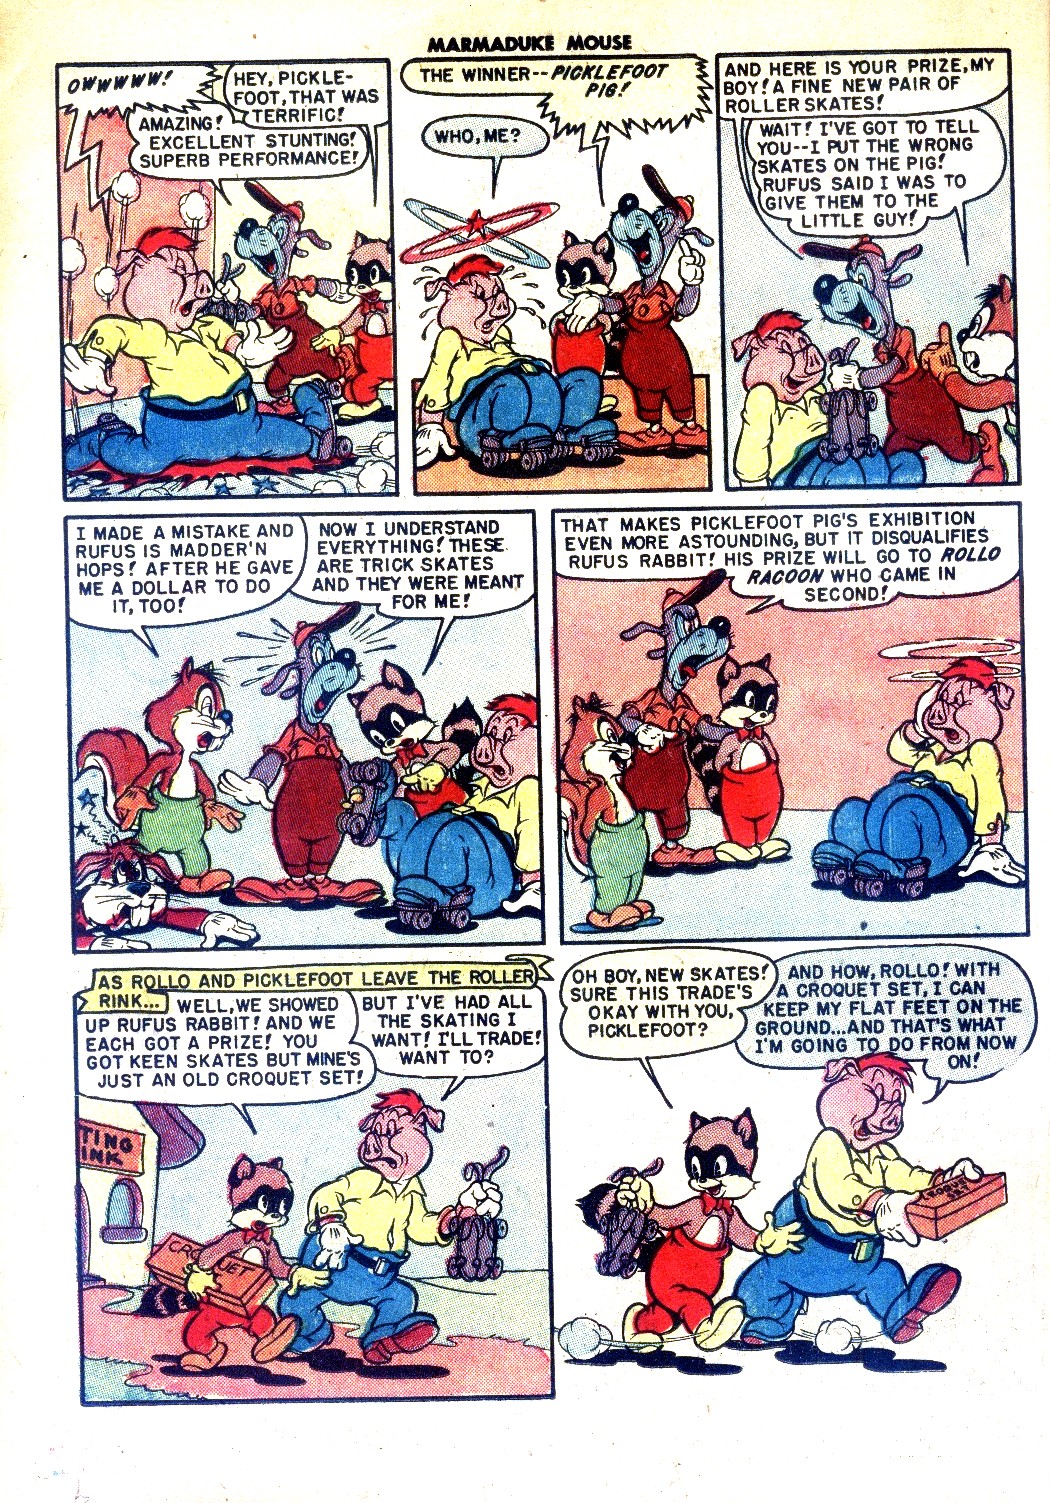 Read online Marmaduke Mouse comic -  Issue #17 - 26